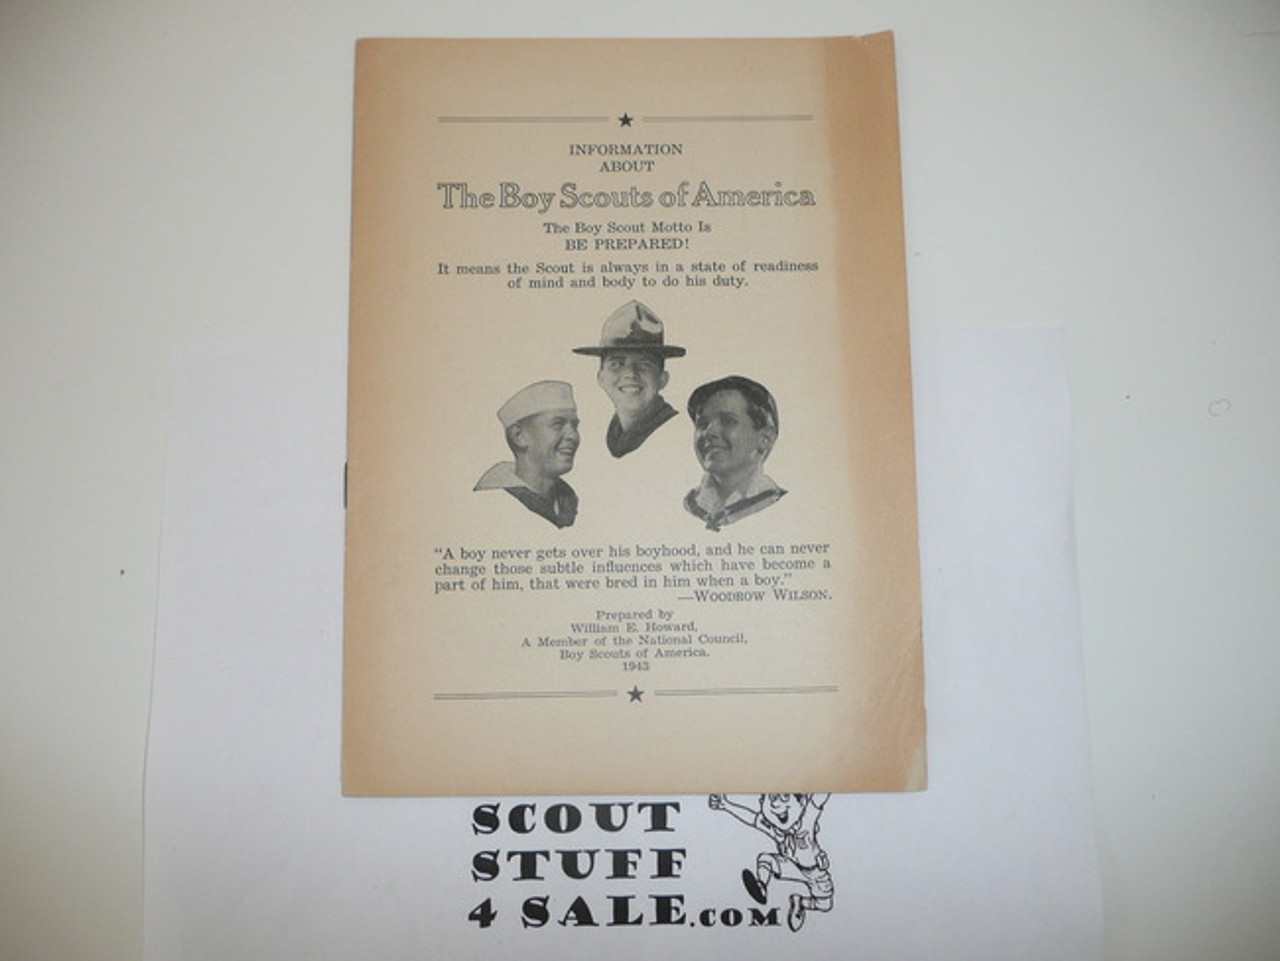 1943 Information About the Boy Scouts of America